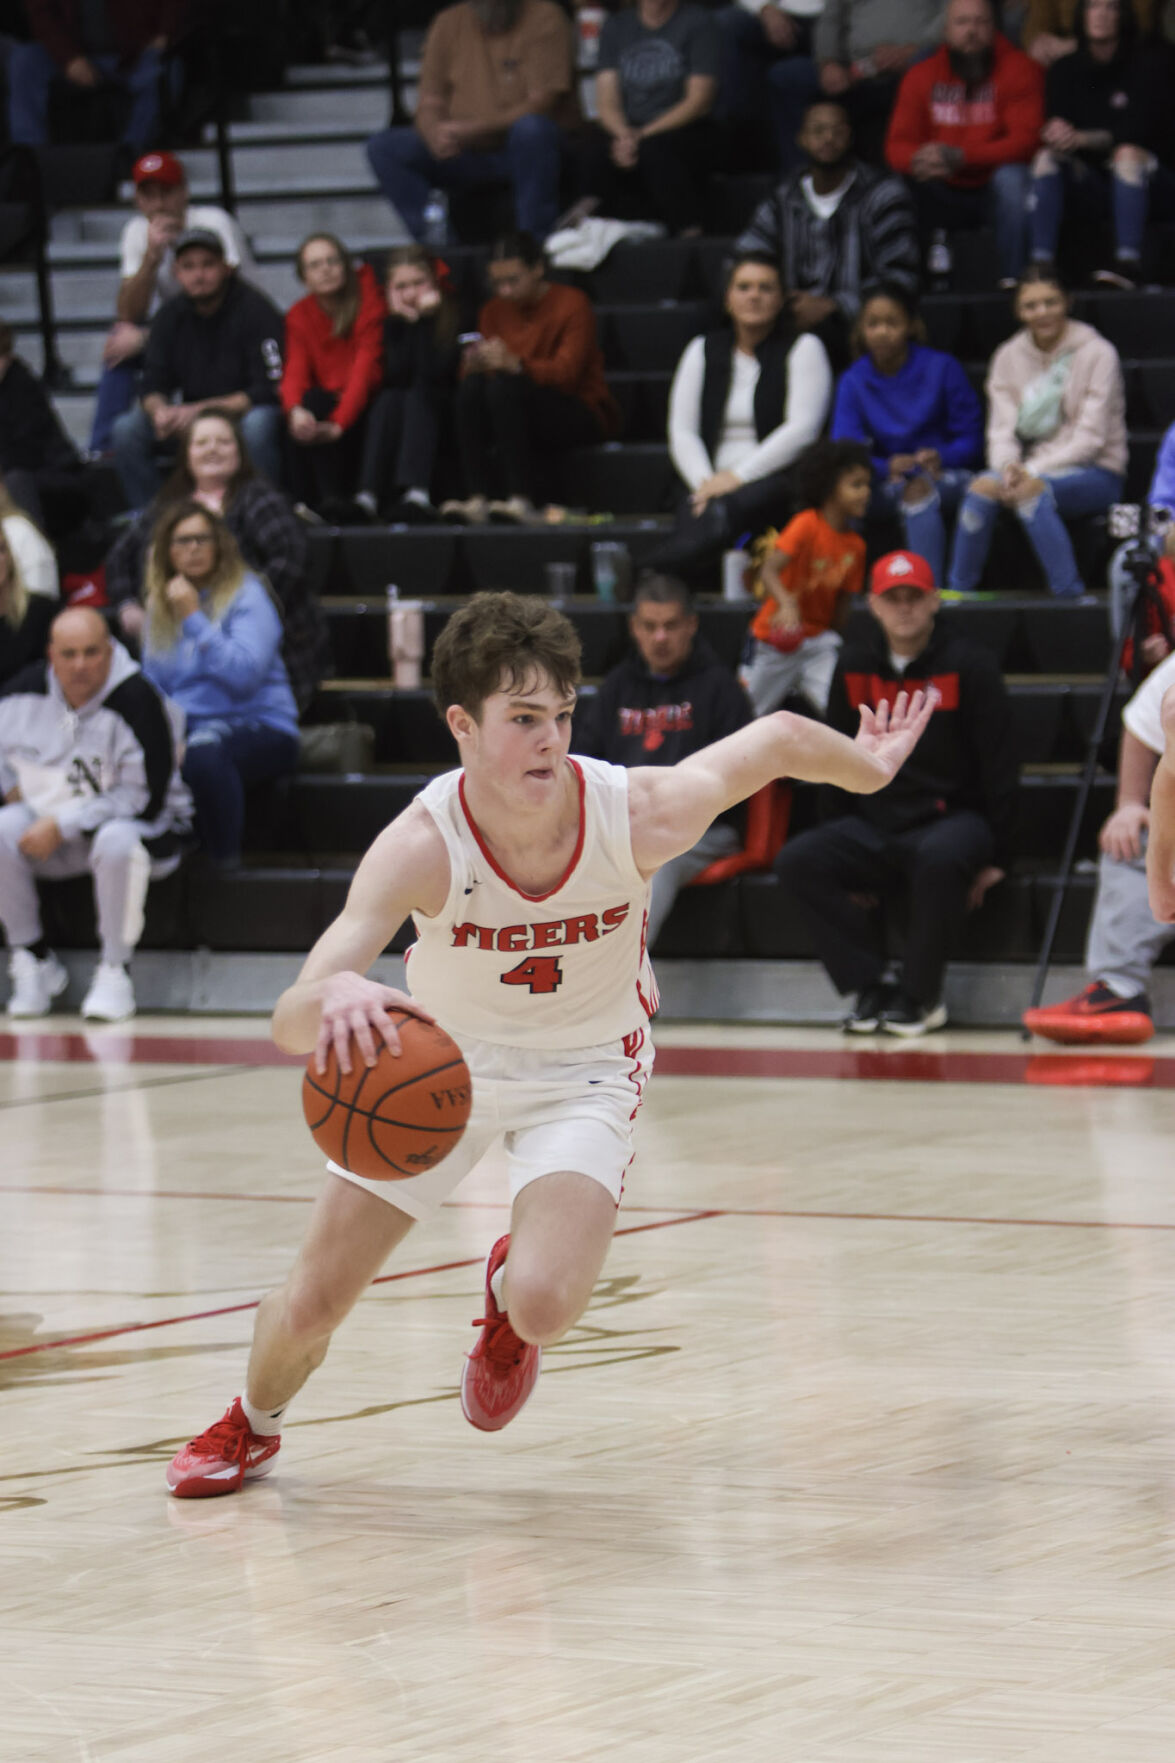 Circleville Boys’ Basketball Team Wins 54-46 Non-Conference Game Against Hillsboro